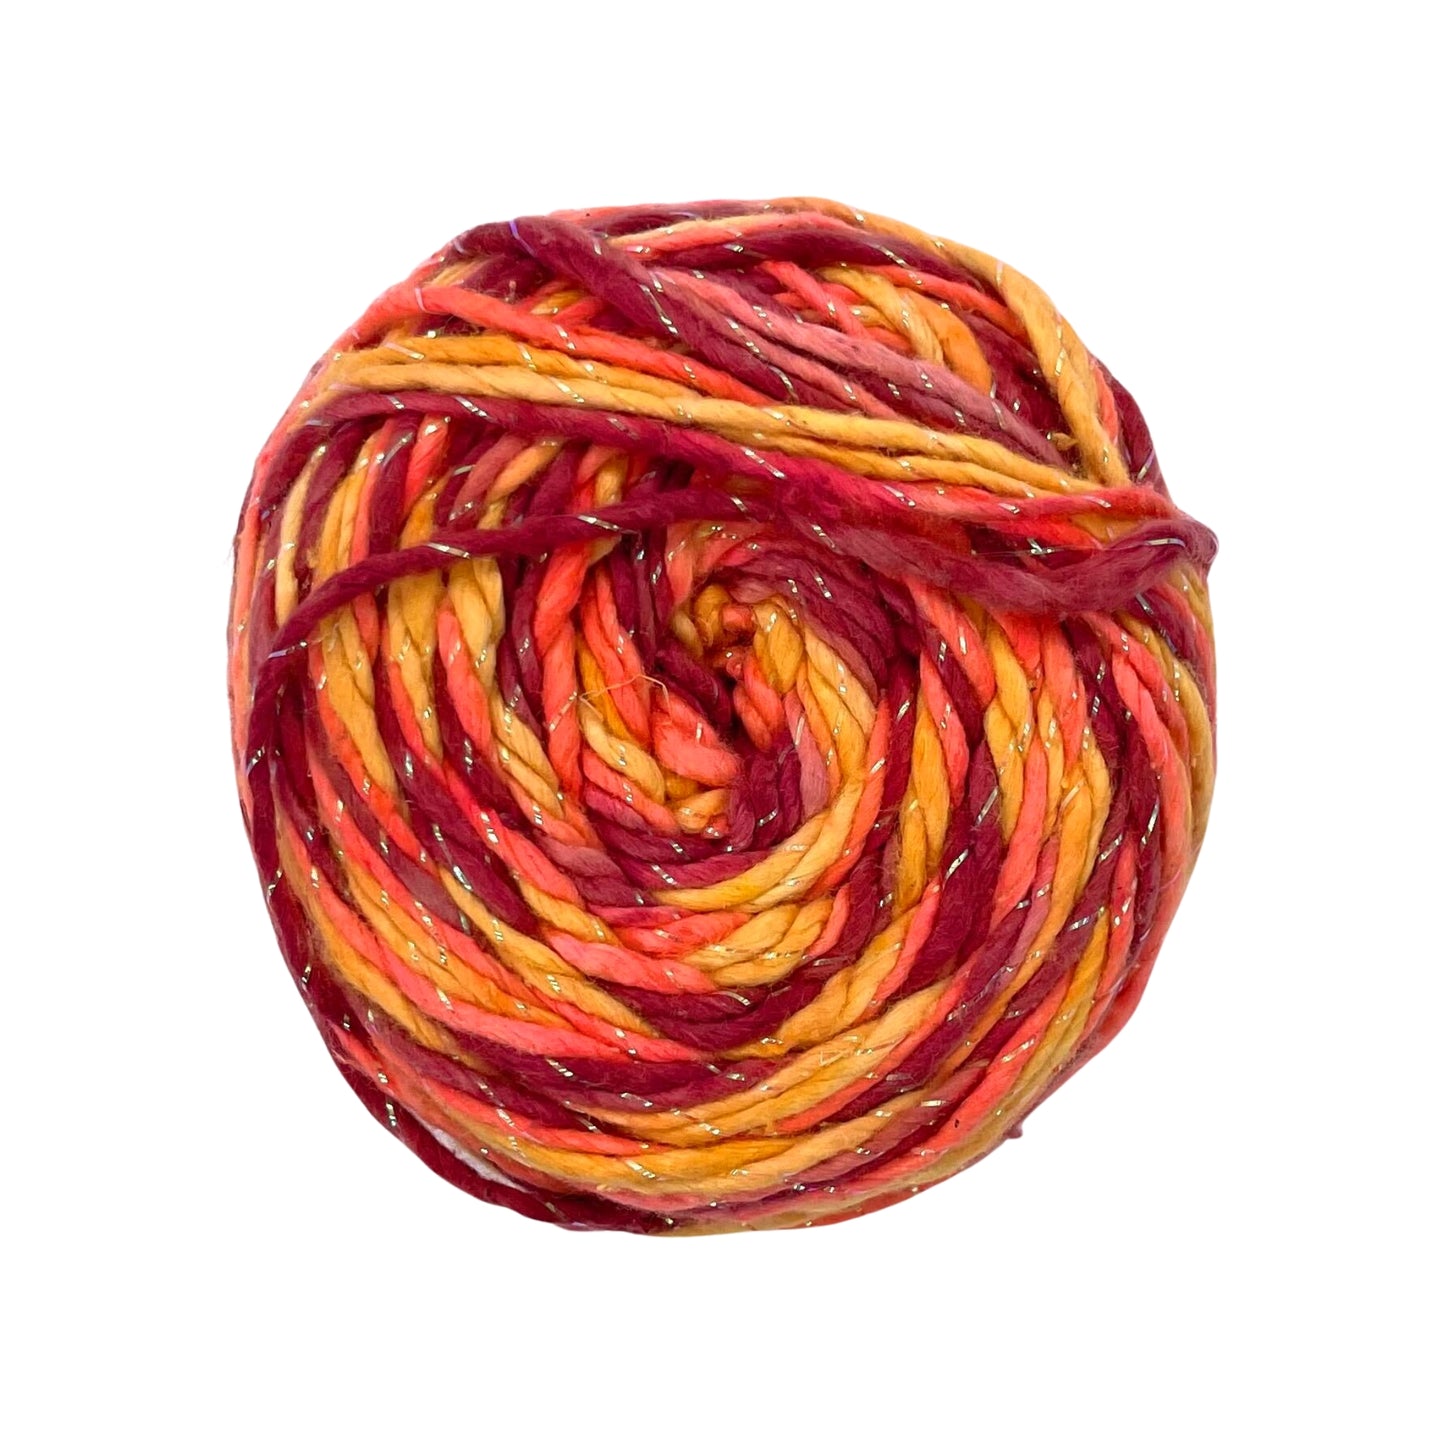 A skein of 4 shades of orange and sparkle on a white background